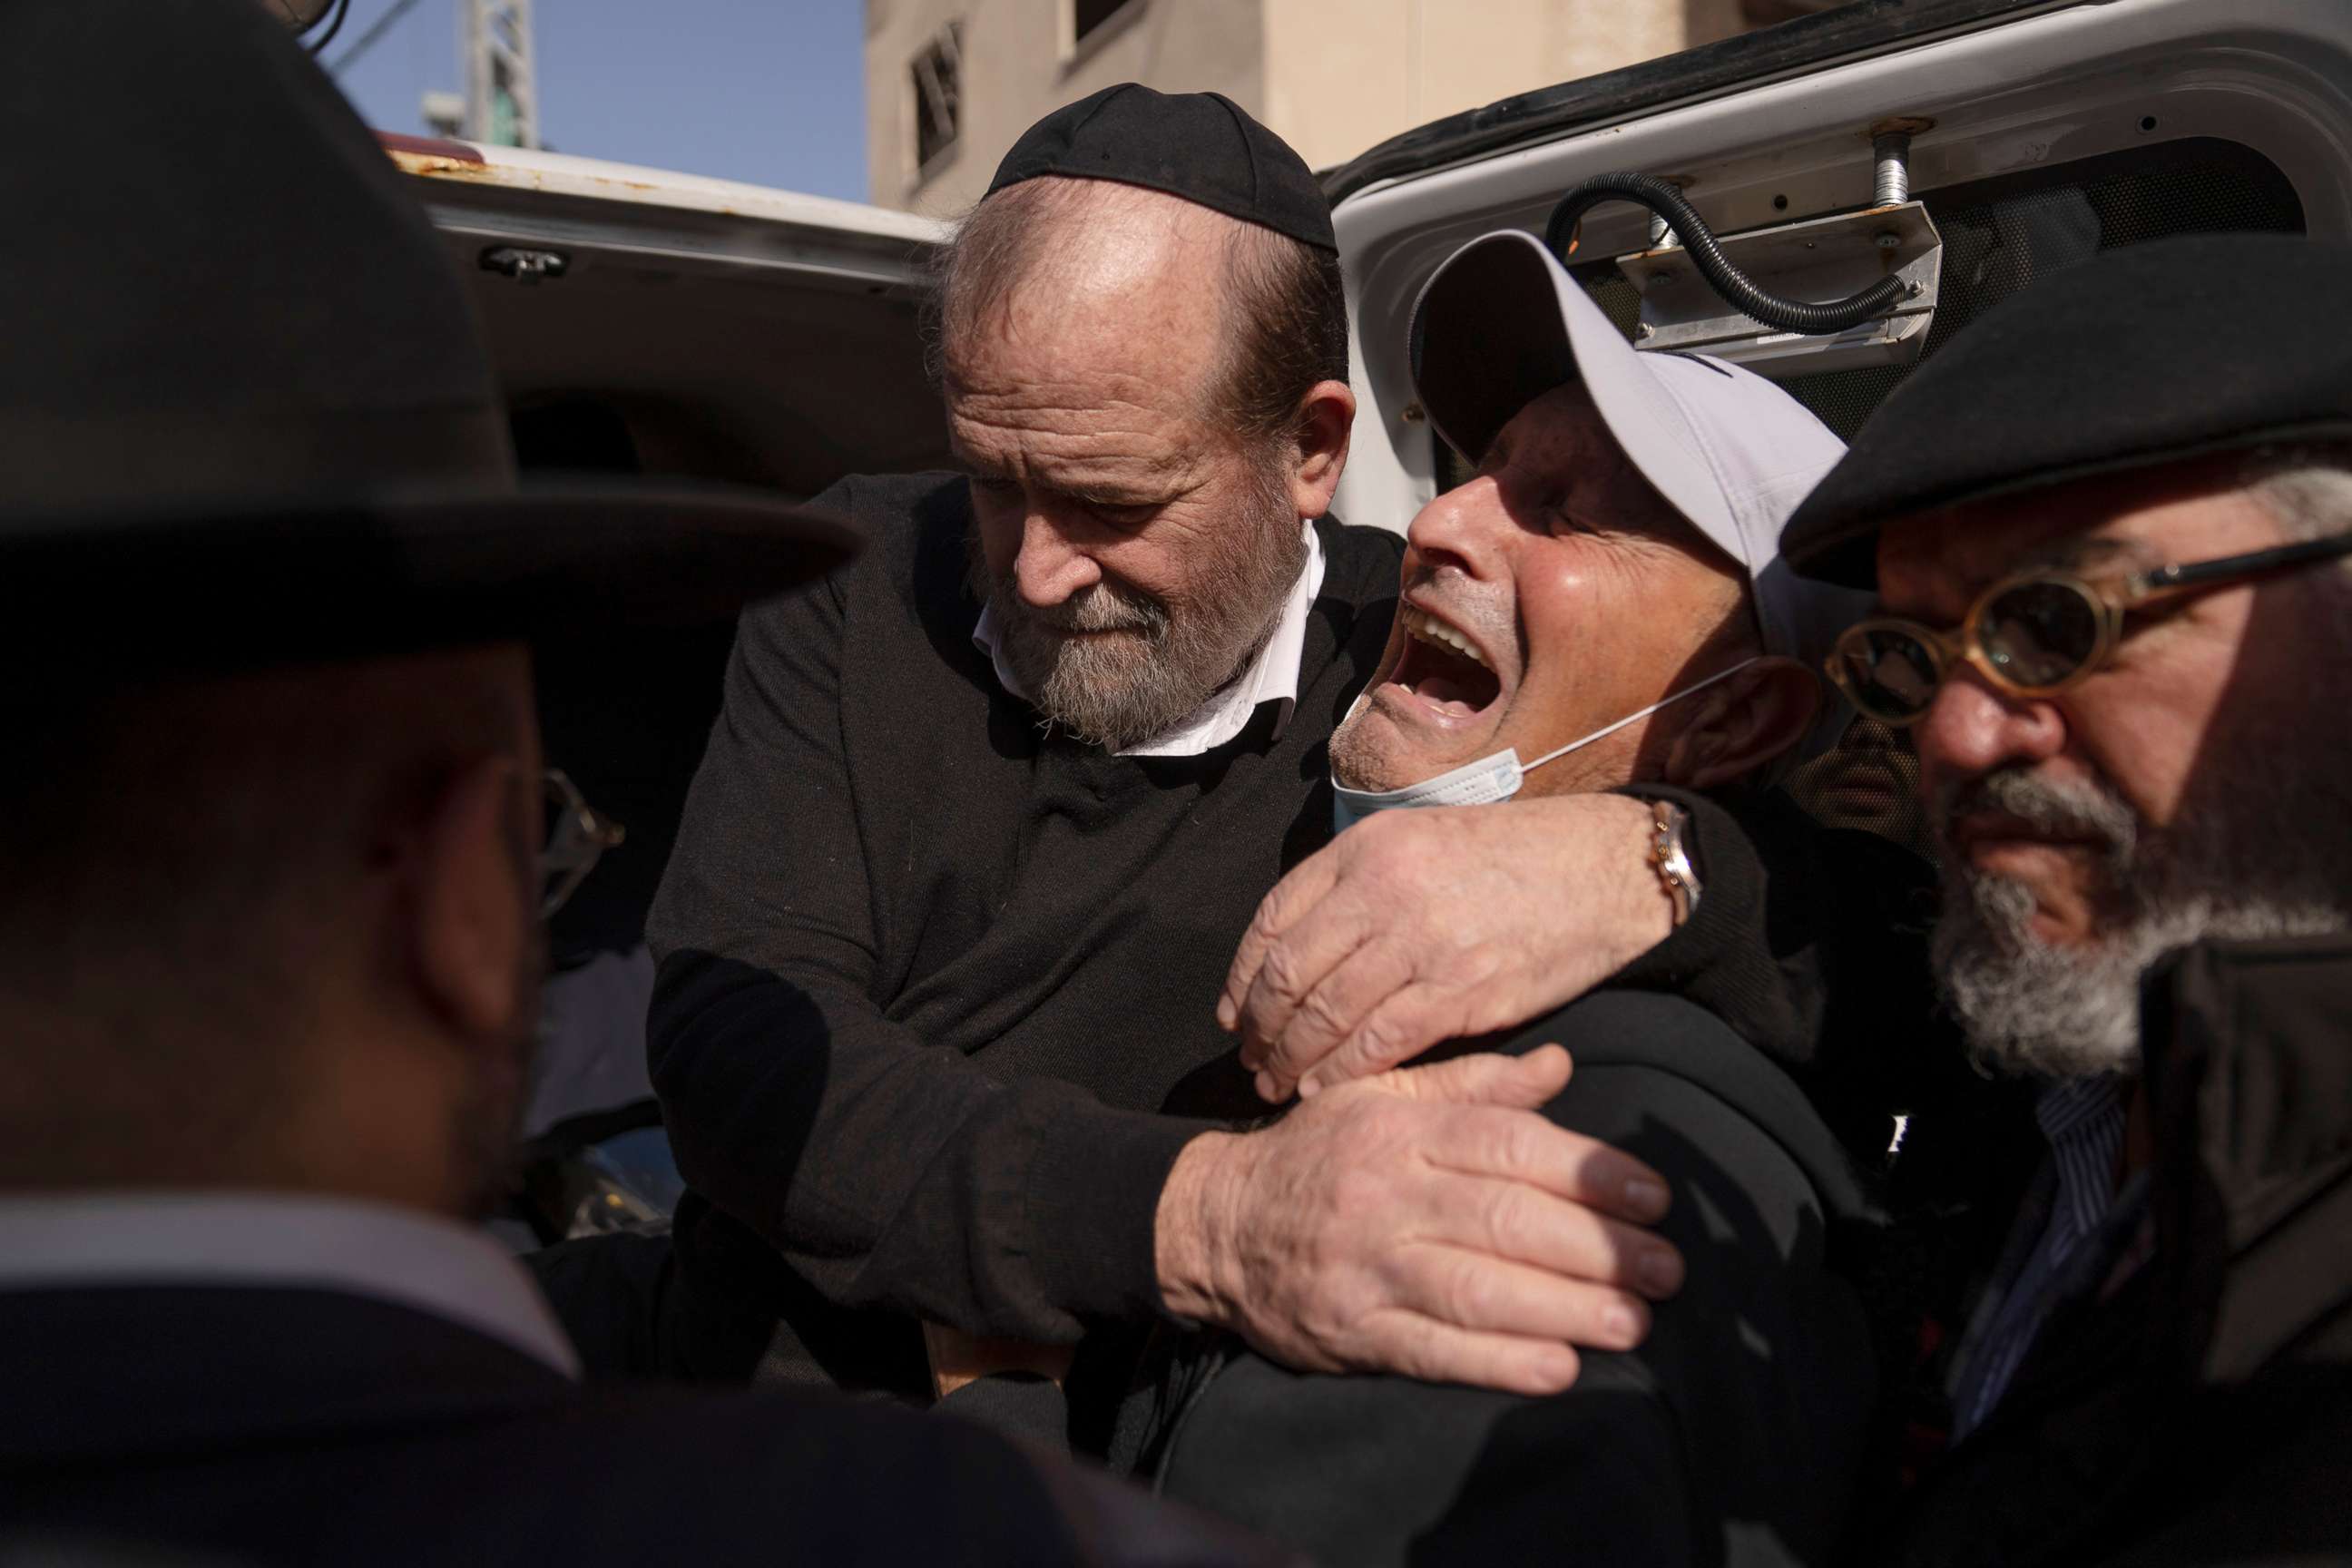 PHOTO: Mourners attend the funeral of Avishai Yehezkel, 29, in Bnei Brak Israel, March 30, 2022. Yehezkel was one of five killed by a gunman in a crowded city in central Israel late March 29, the second mass shooting rampage this week.